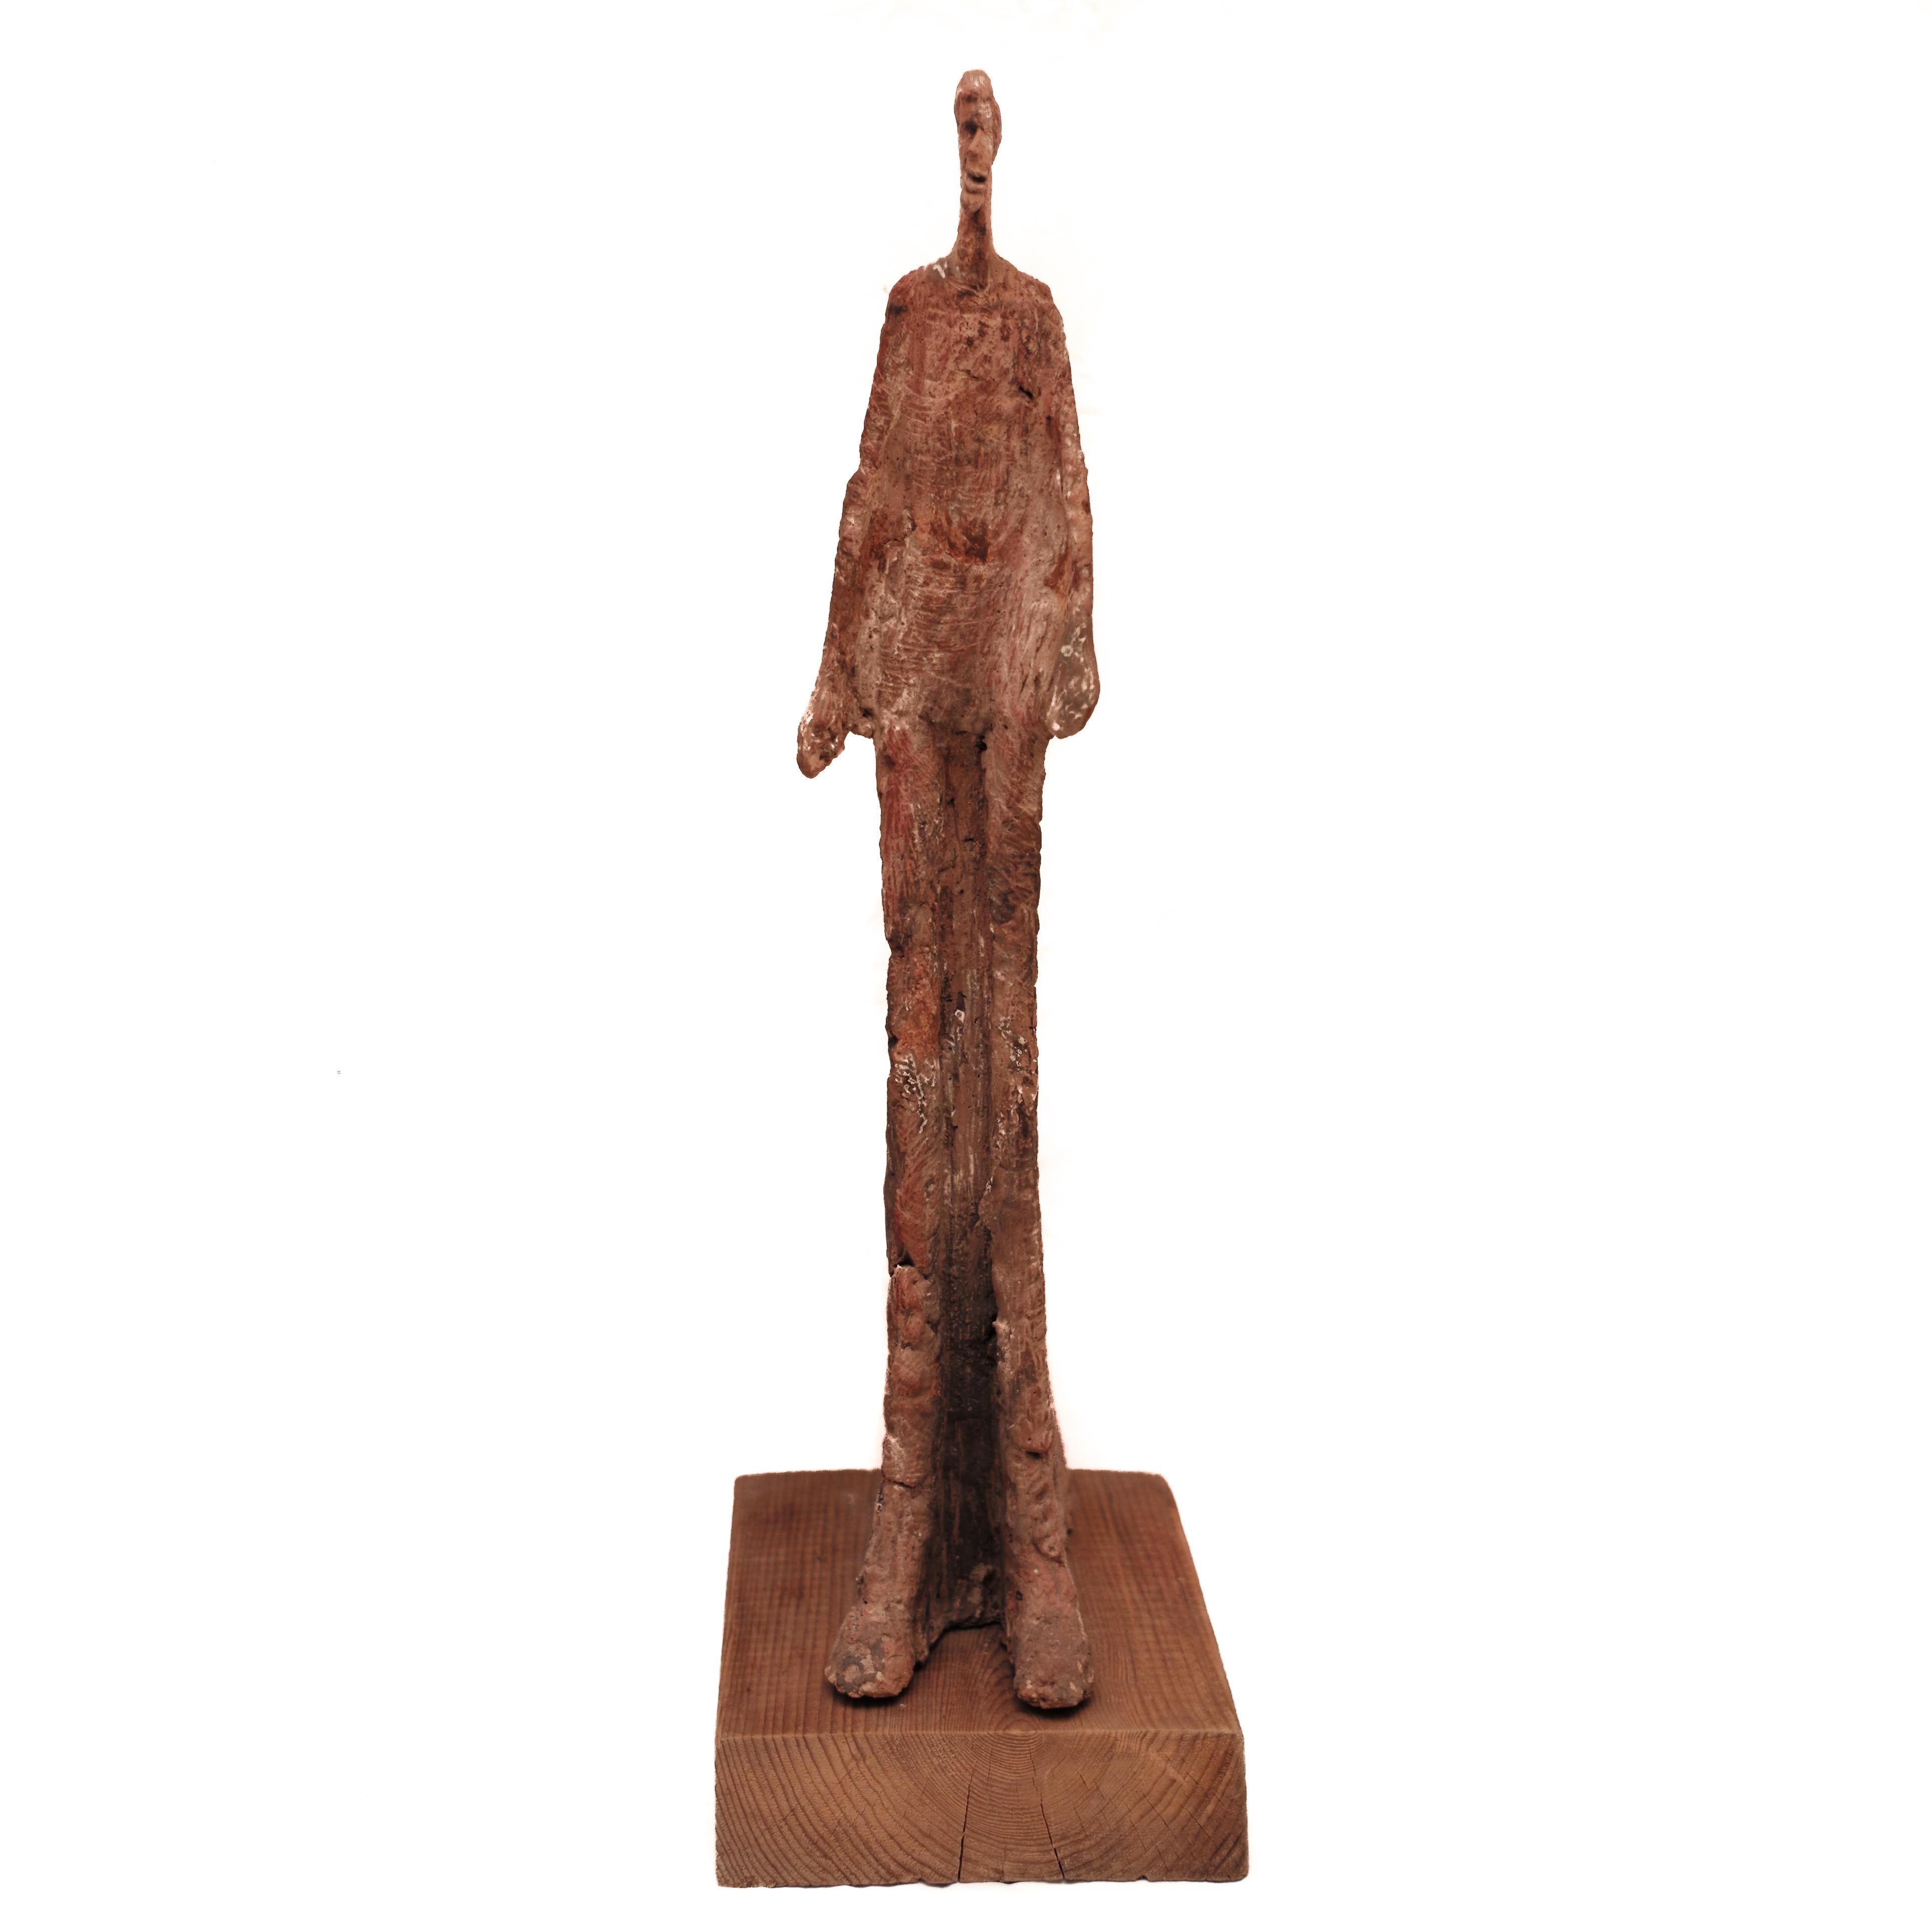 Terracotta Sculpture by Swedish artist Evert Lindfors (1927-2016), made in the 1970s.

Evert moved to France in the 1940s where he studied at the École des Beaux-Arts in Paris. He worked from the mid-1950s as a painter in Lacoste in Provence,